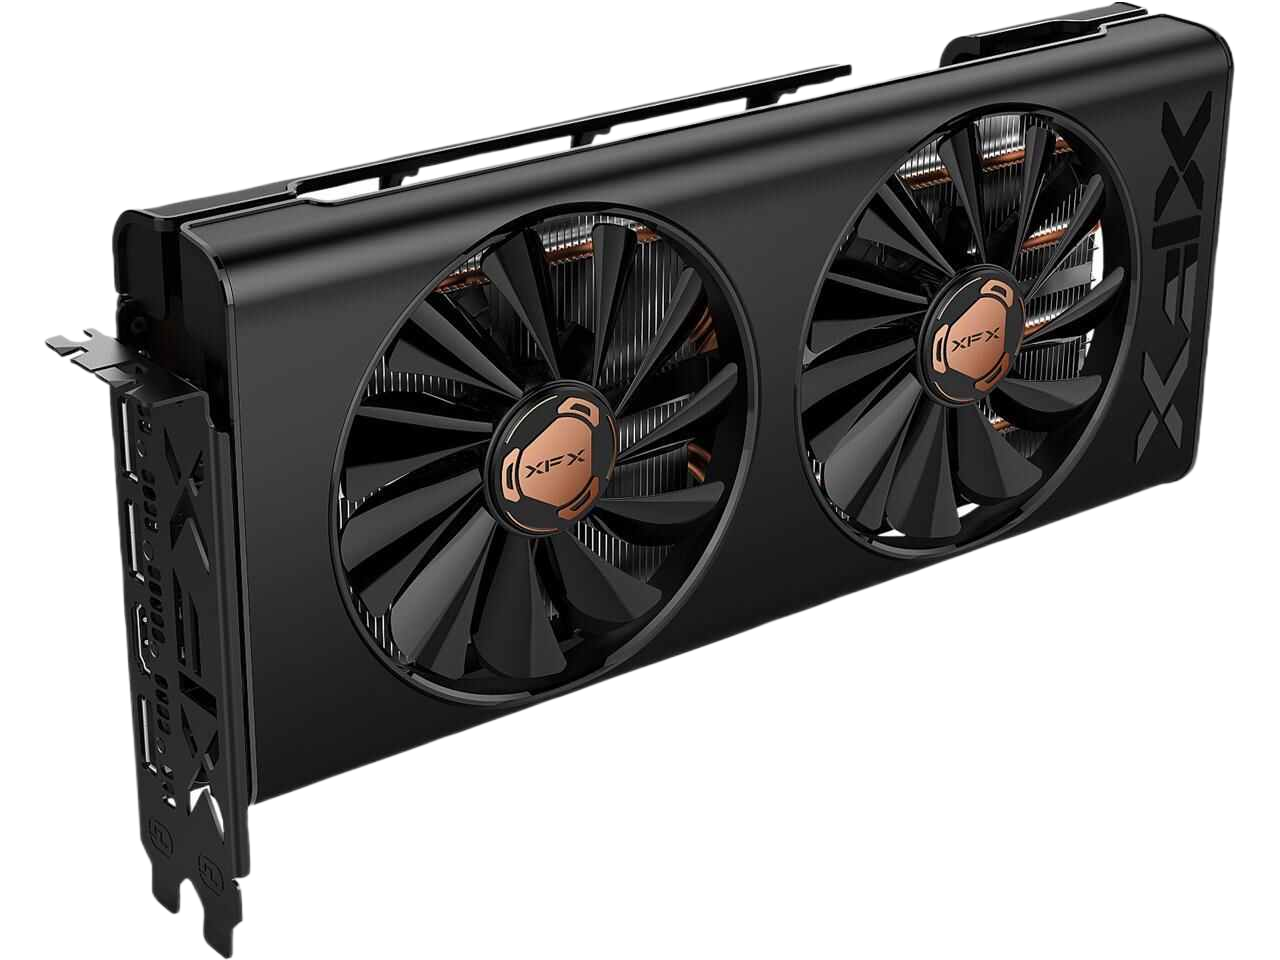 XFX AMD Radeon RX 5600 XT THICC II PRO-14GBPS 6GB BOOST UP TO